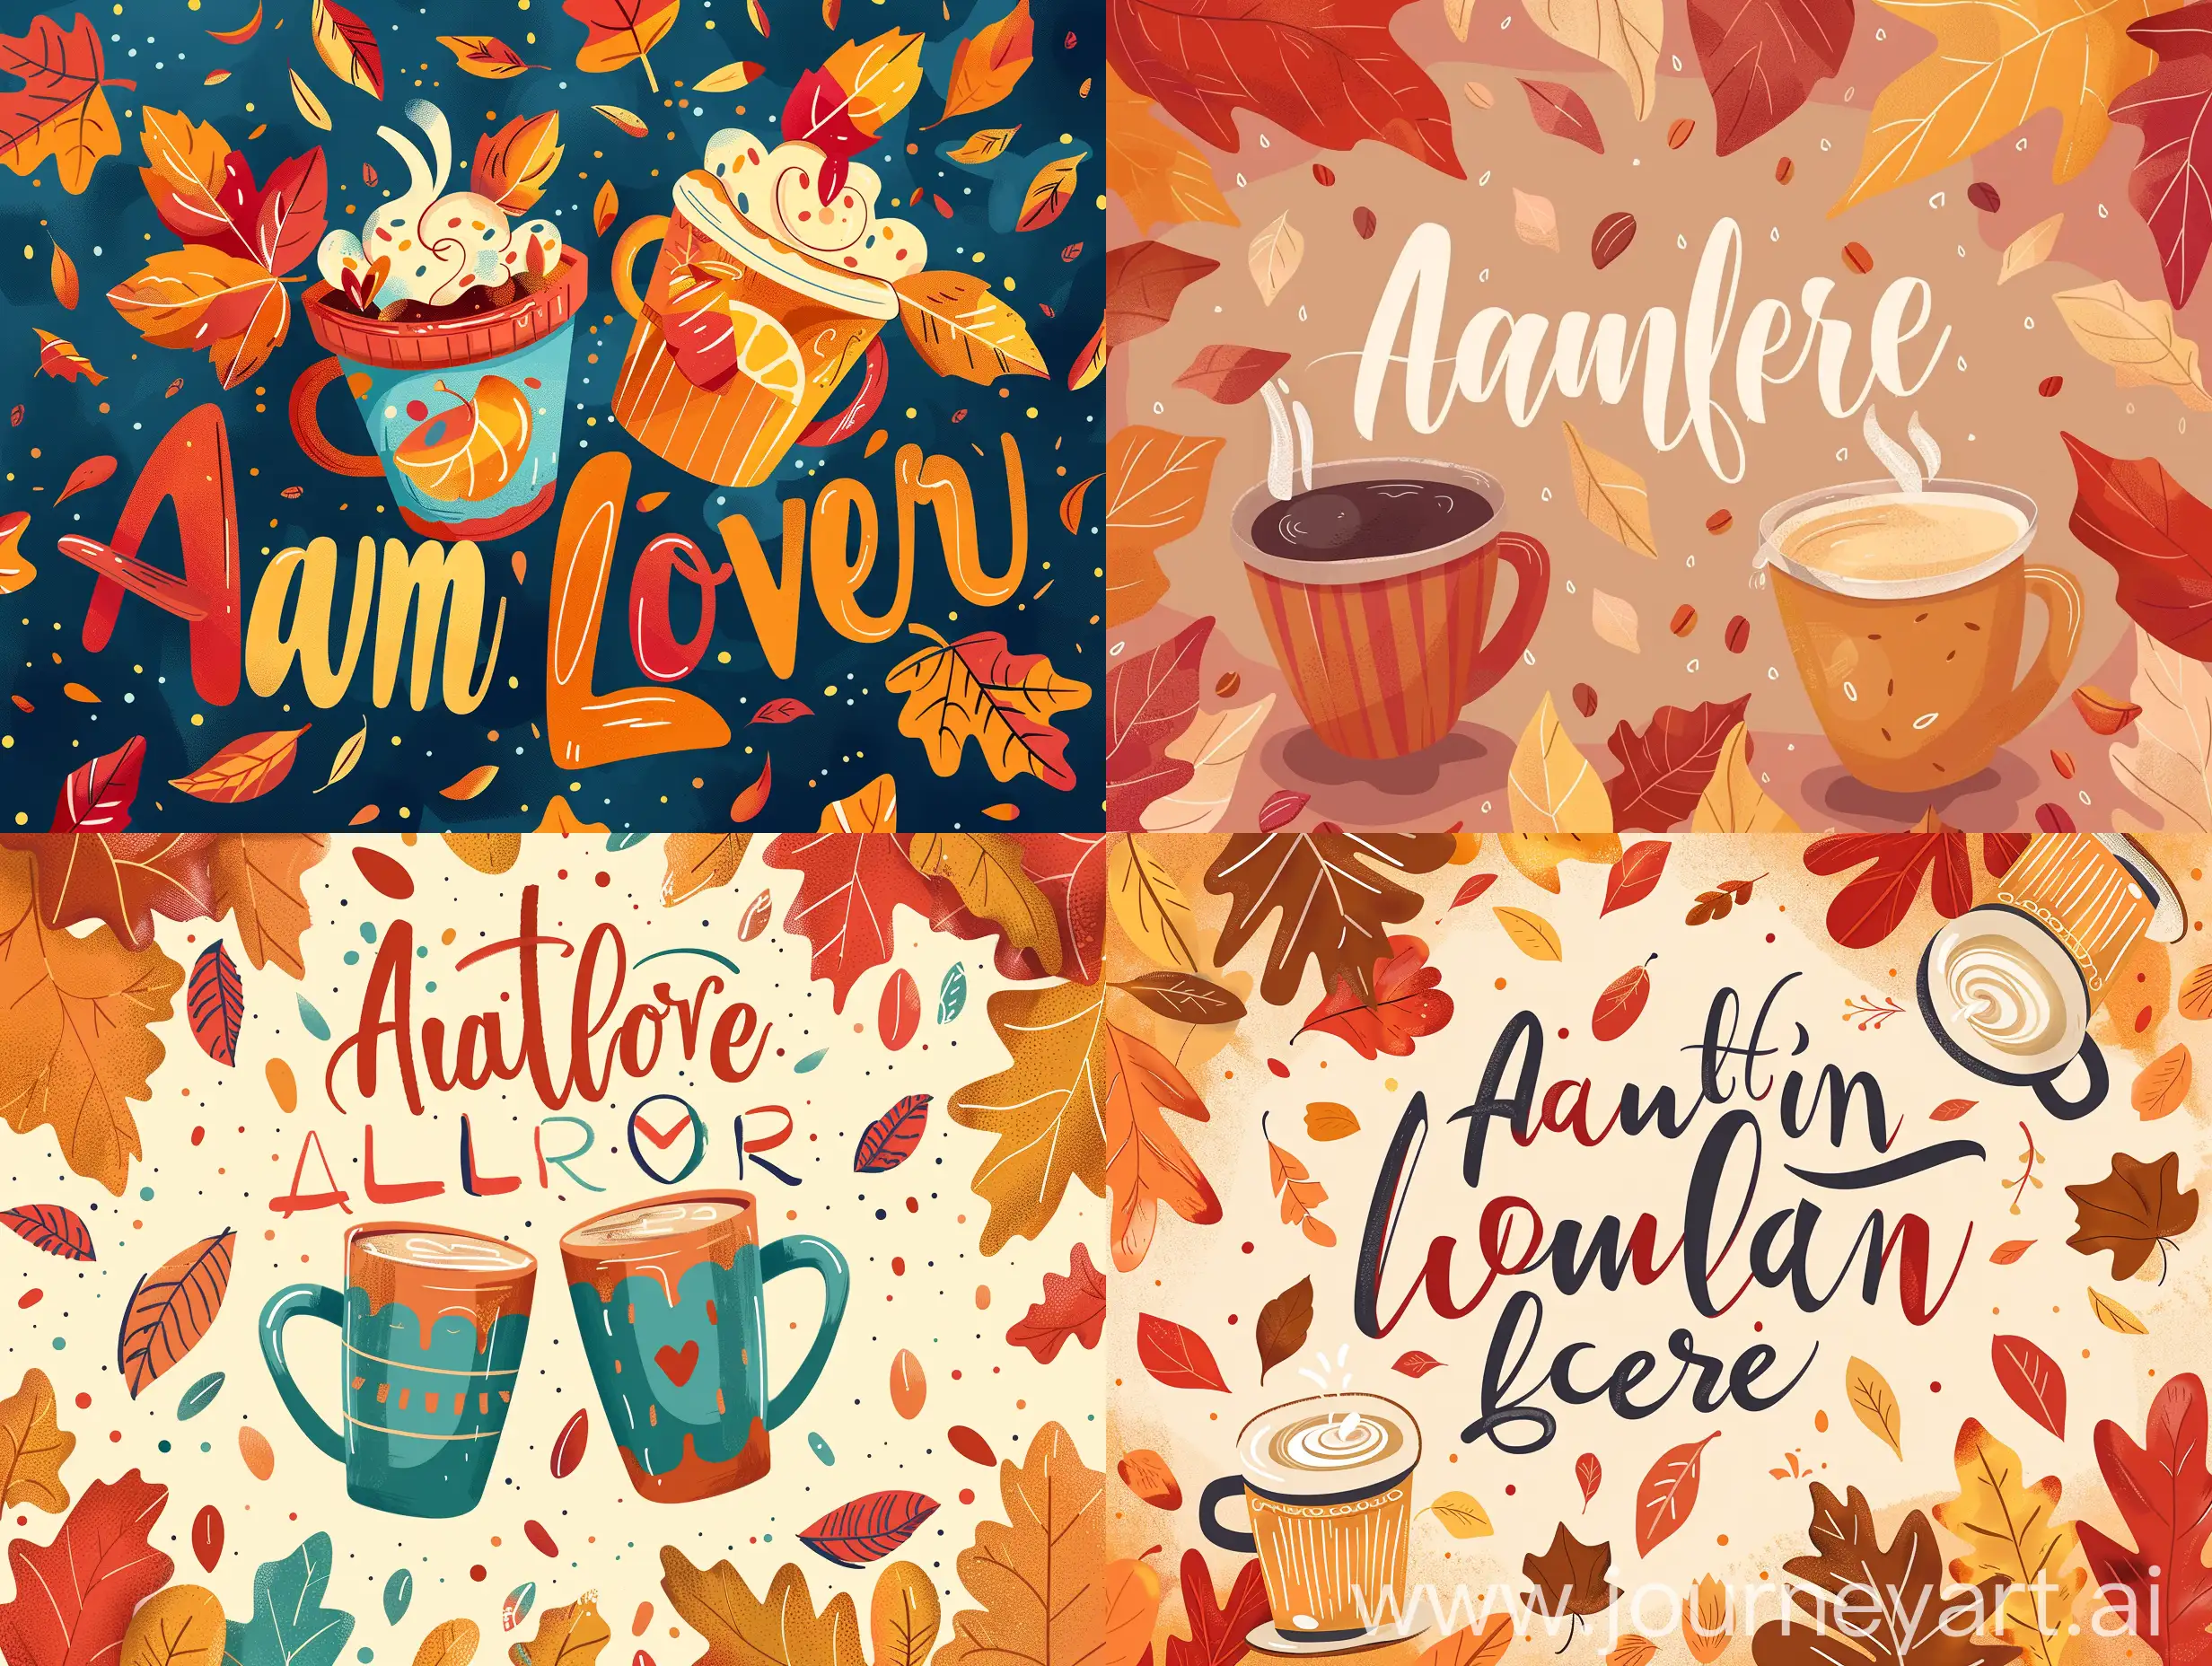 Dreamy-Cartoon-Style-Autumn-Scene-with-Coffee-Cups-and-Falling-Leaves